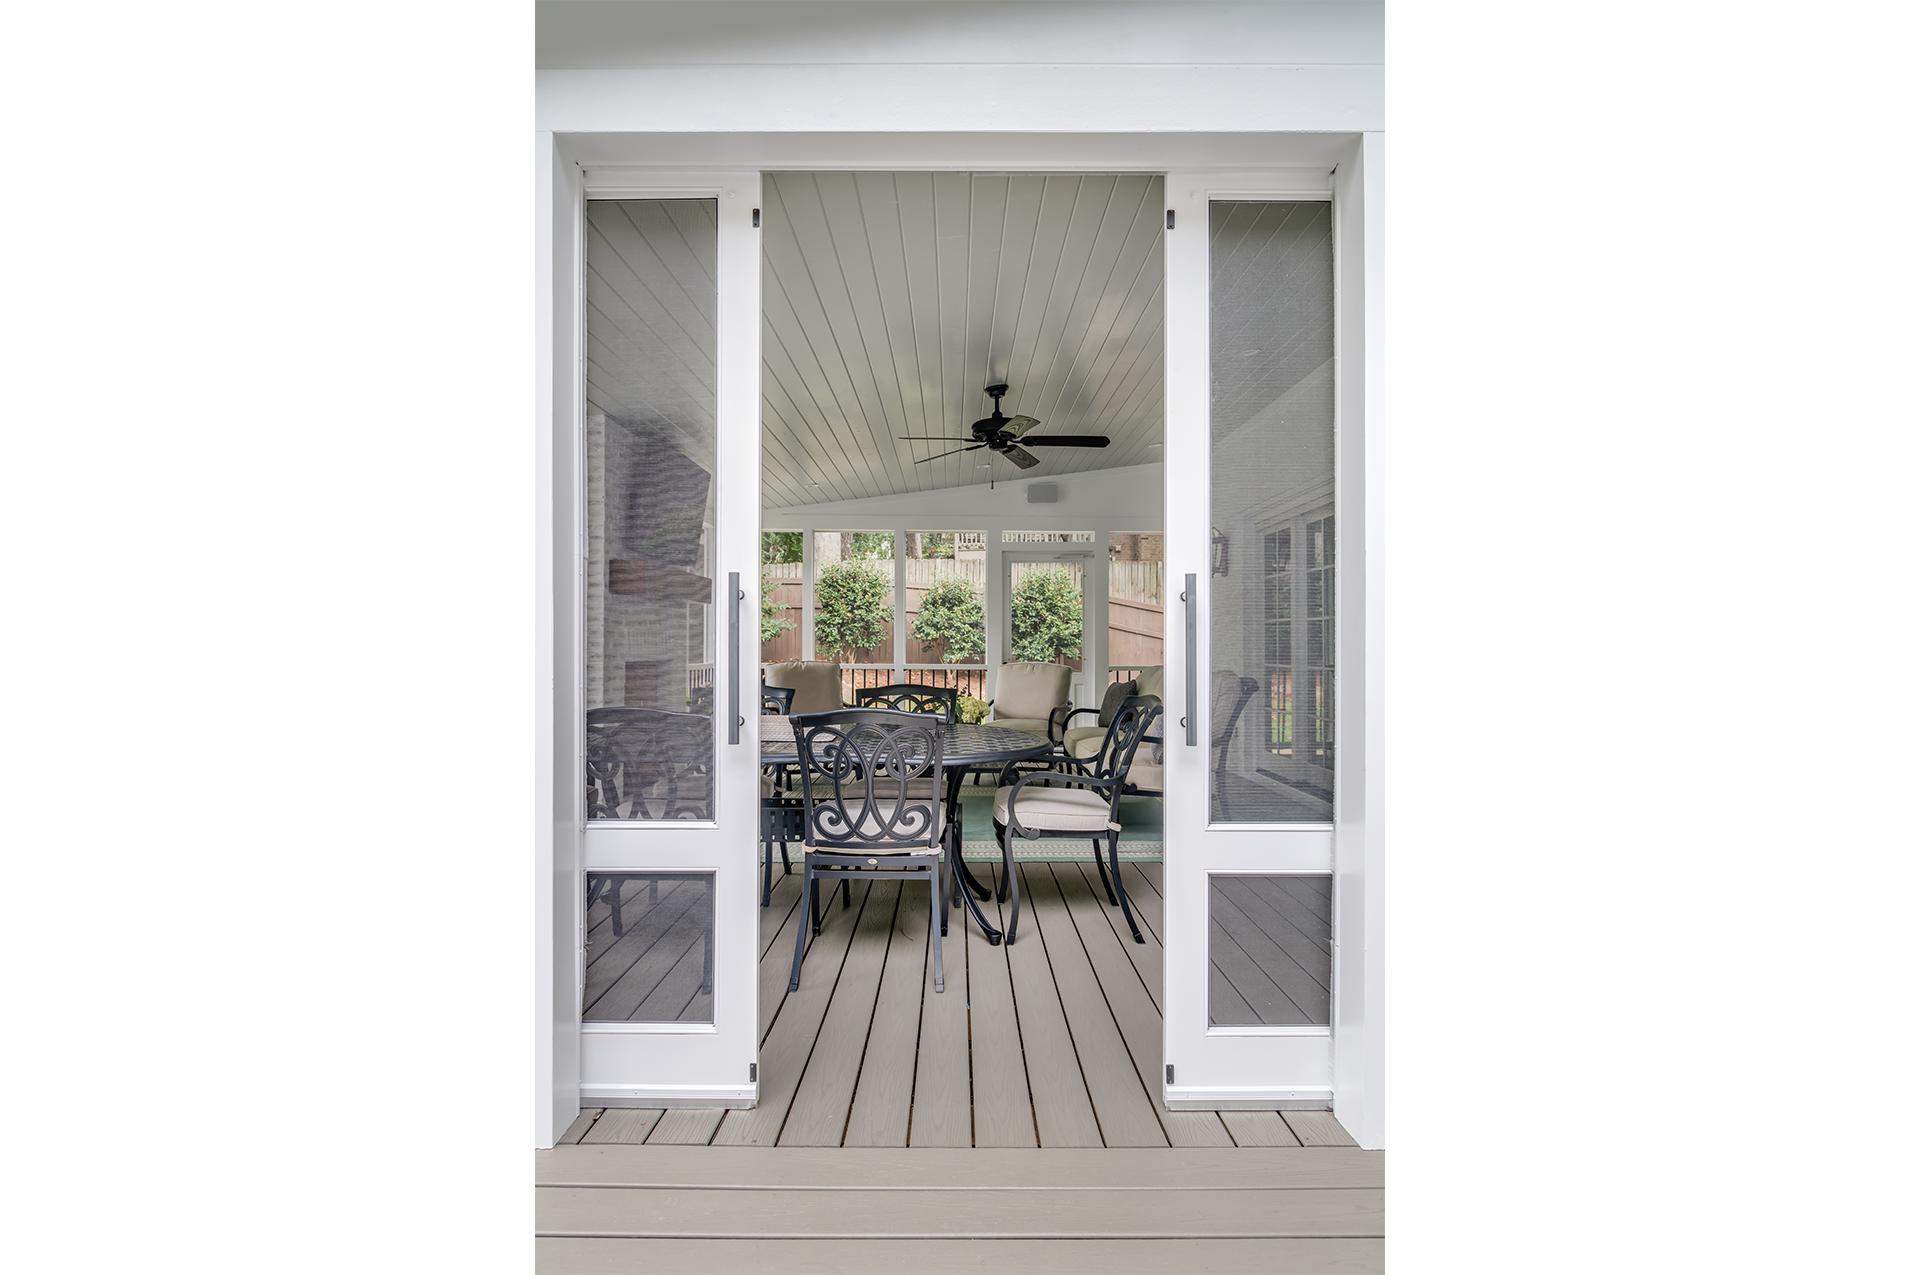 A newly remodeled covered porch with white screen doors